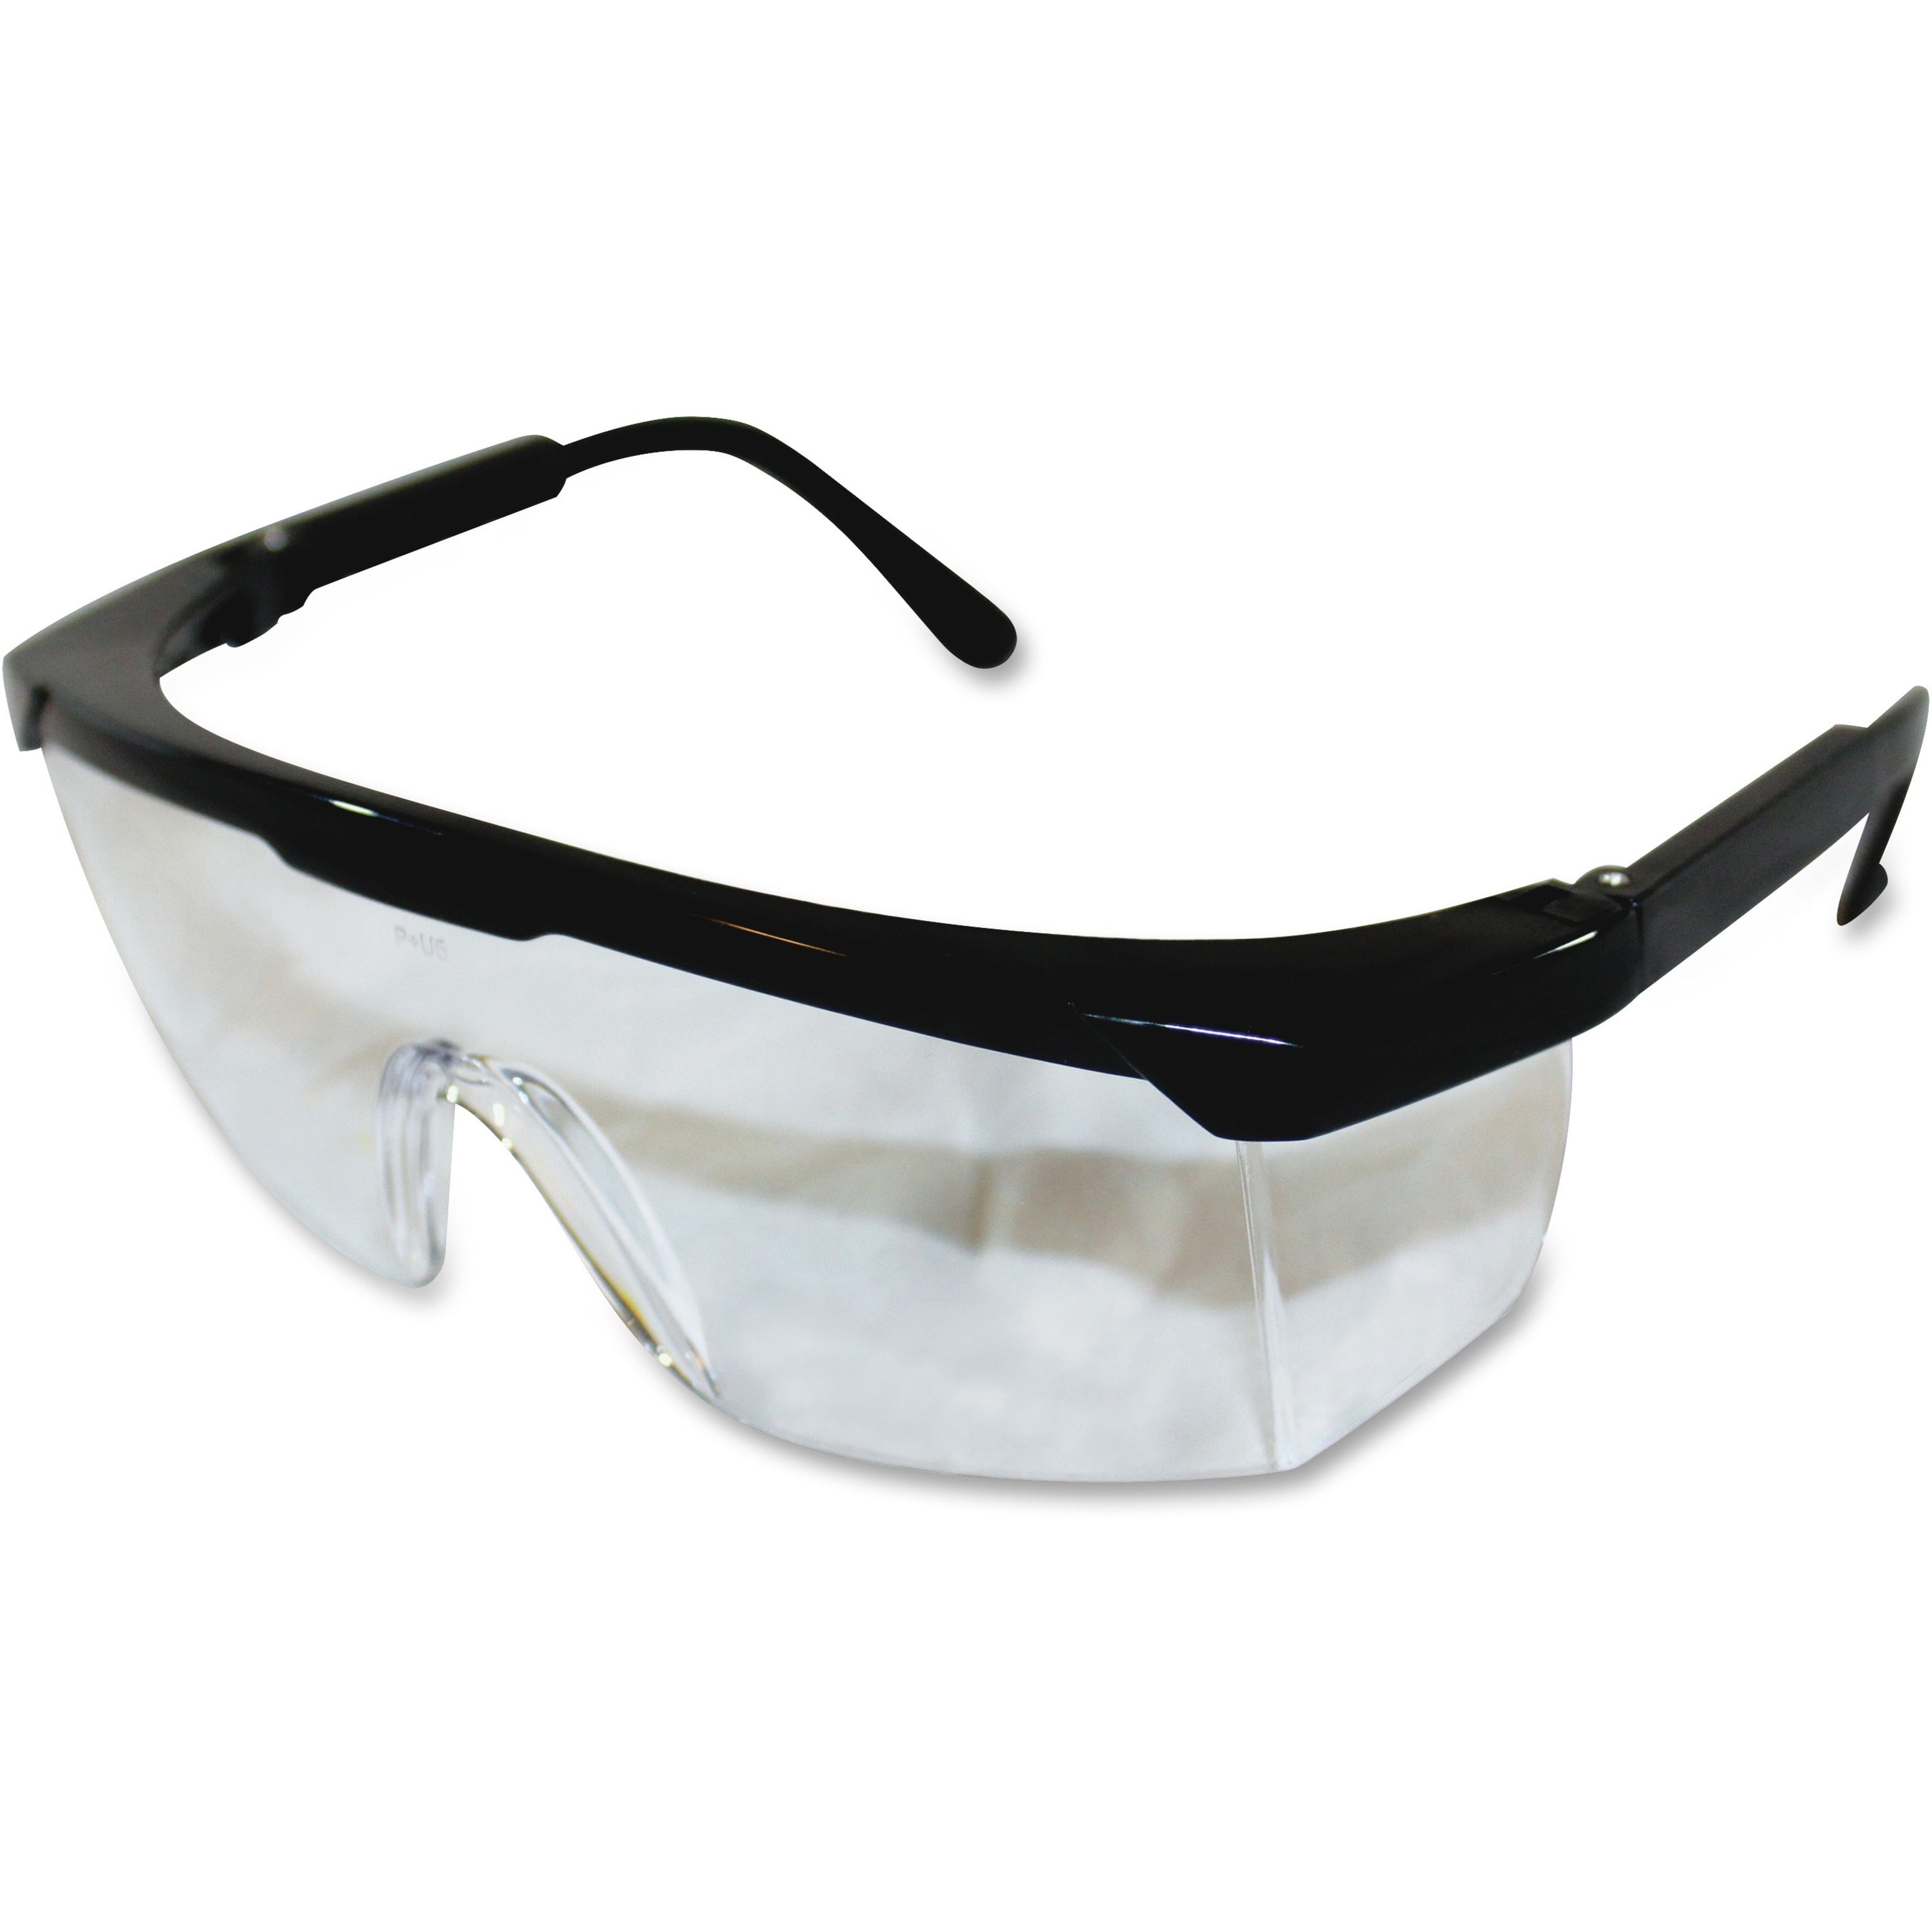 proguard-classic-801-single-lens-safety-eyewear-universal-size-ultraviolet-impact-eye-protection-polycarbonate-clear-lens-clear-frame-scratch-resistant-adjustable-temple-high-visibility-wraparound-lens-comfortable-12-carton_pgd7334bct - 1